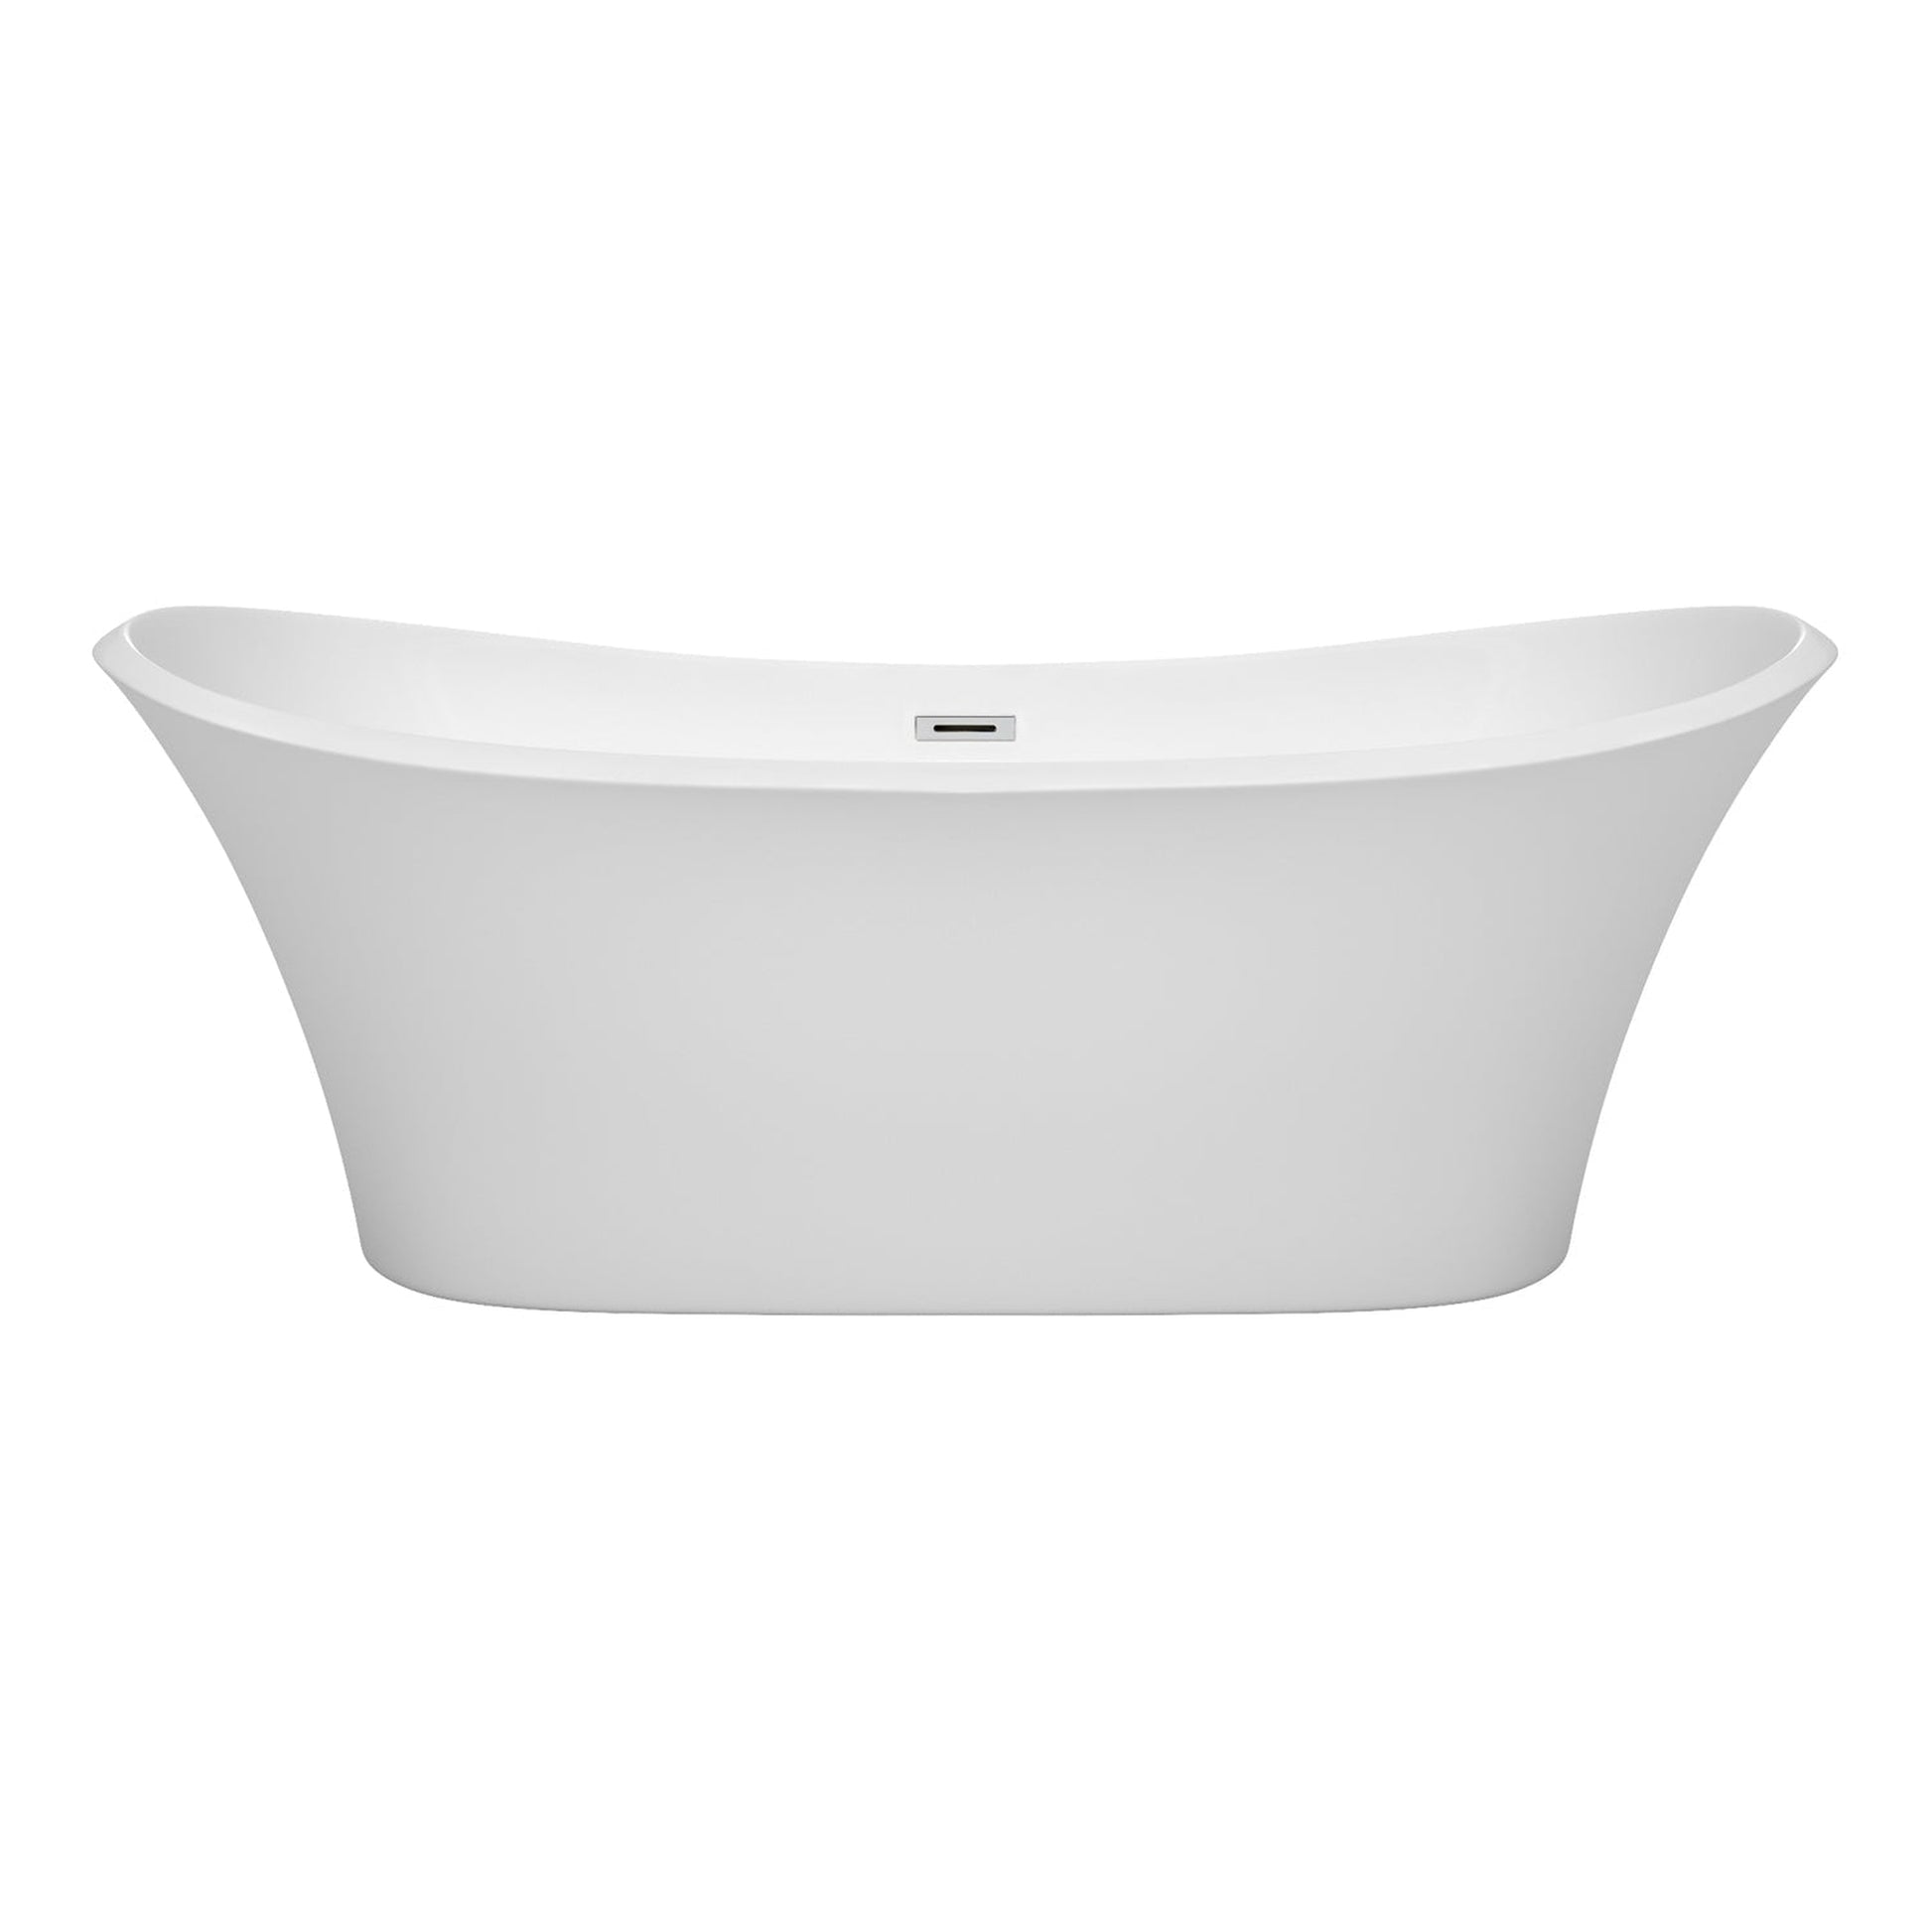 Wyndham Collection Bolera 71" Freestanding Bathtub in White With Polished Chrome Drain and Overflow Trim